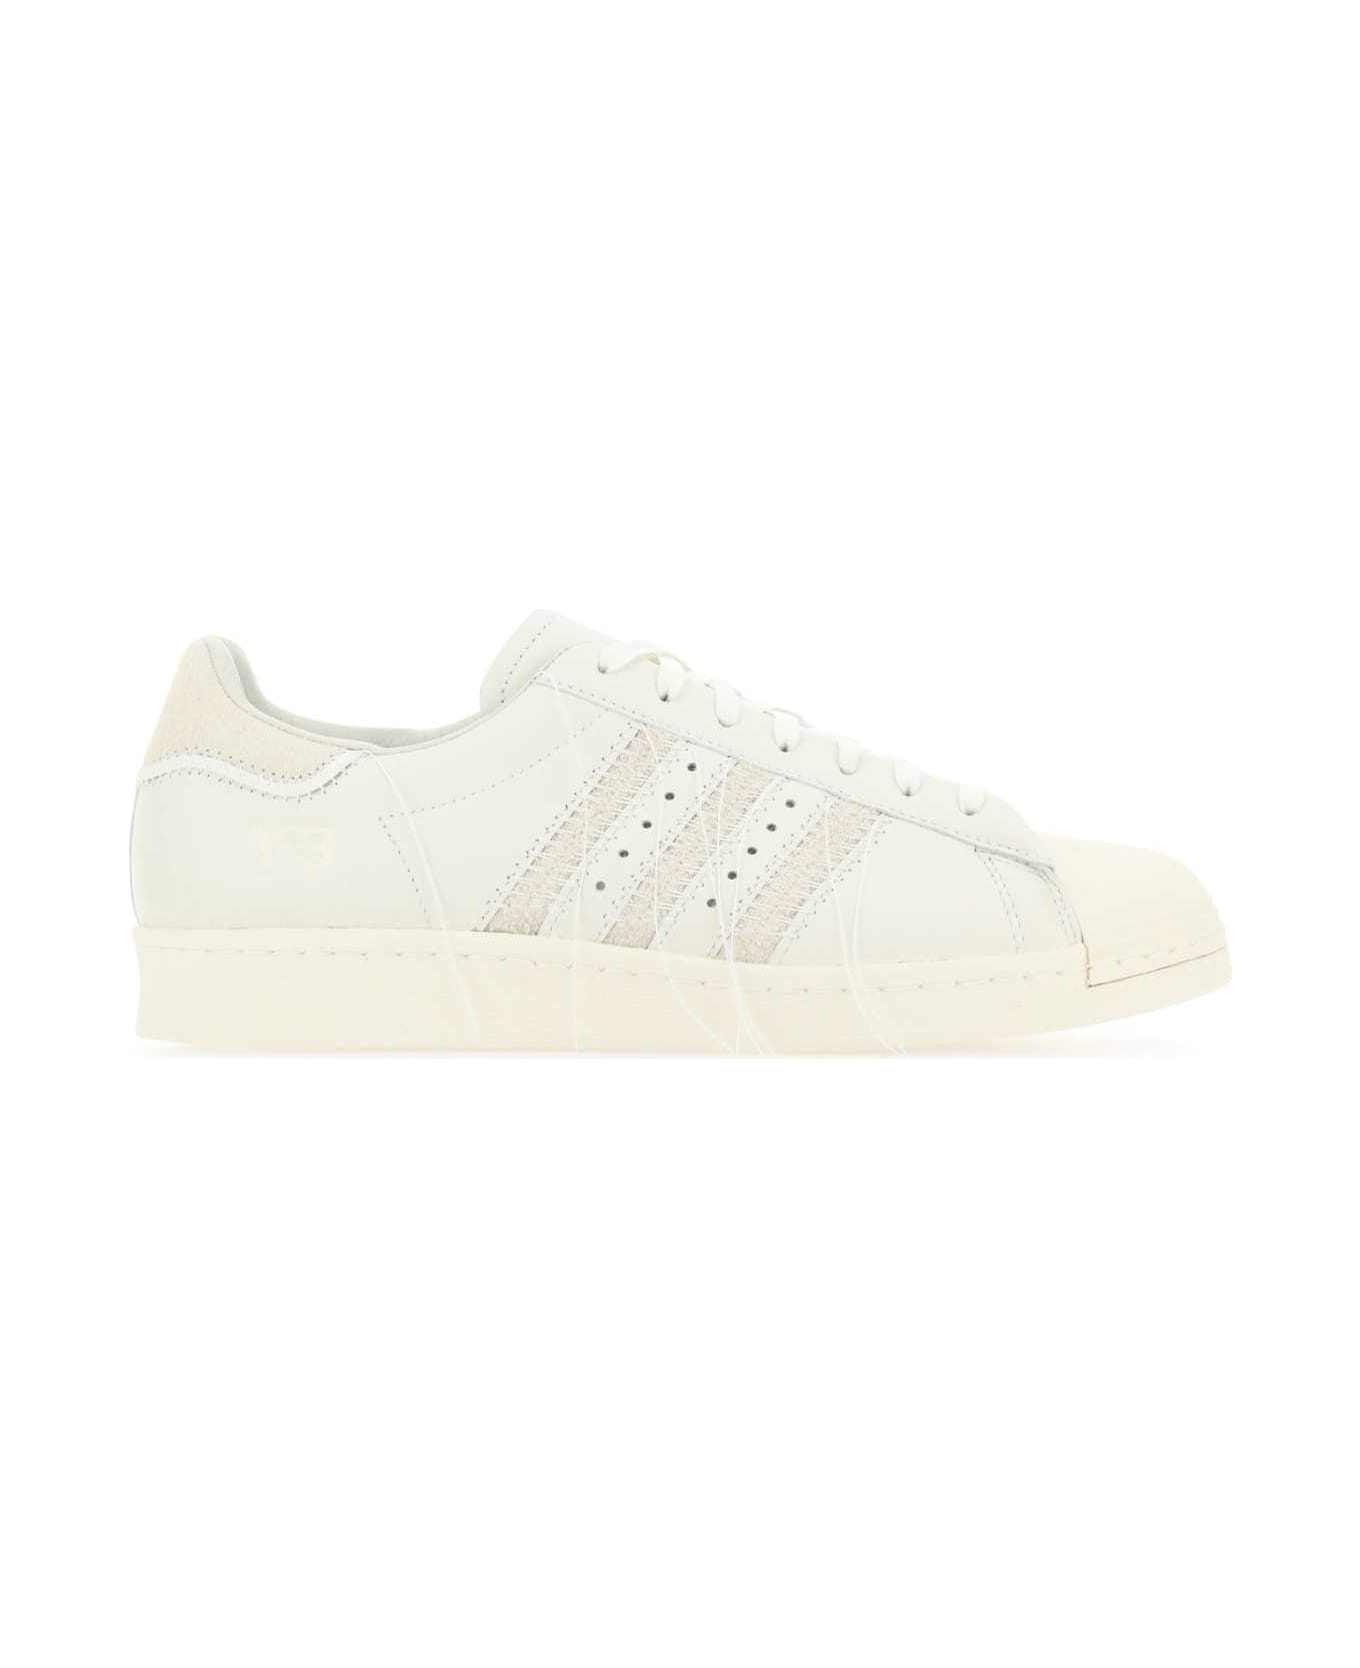 Y-3 Ivory Leather Y-3 Superstar Sneakers - OFFWHI スニーカー